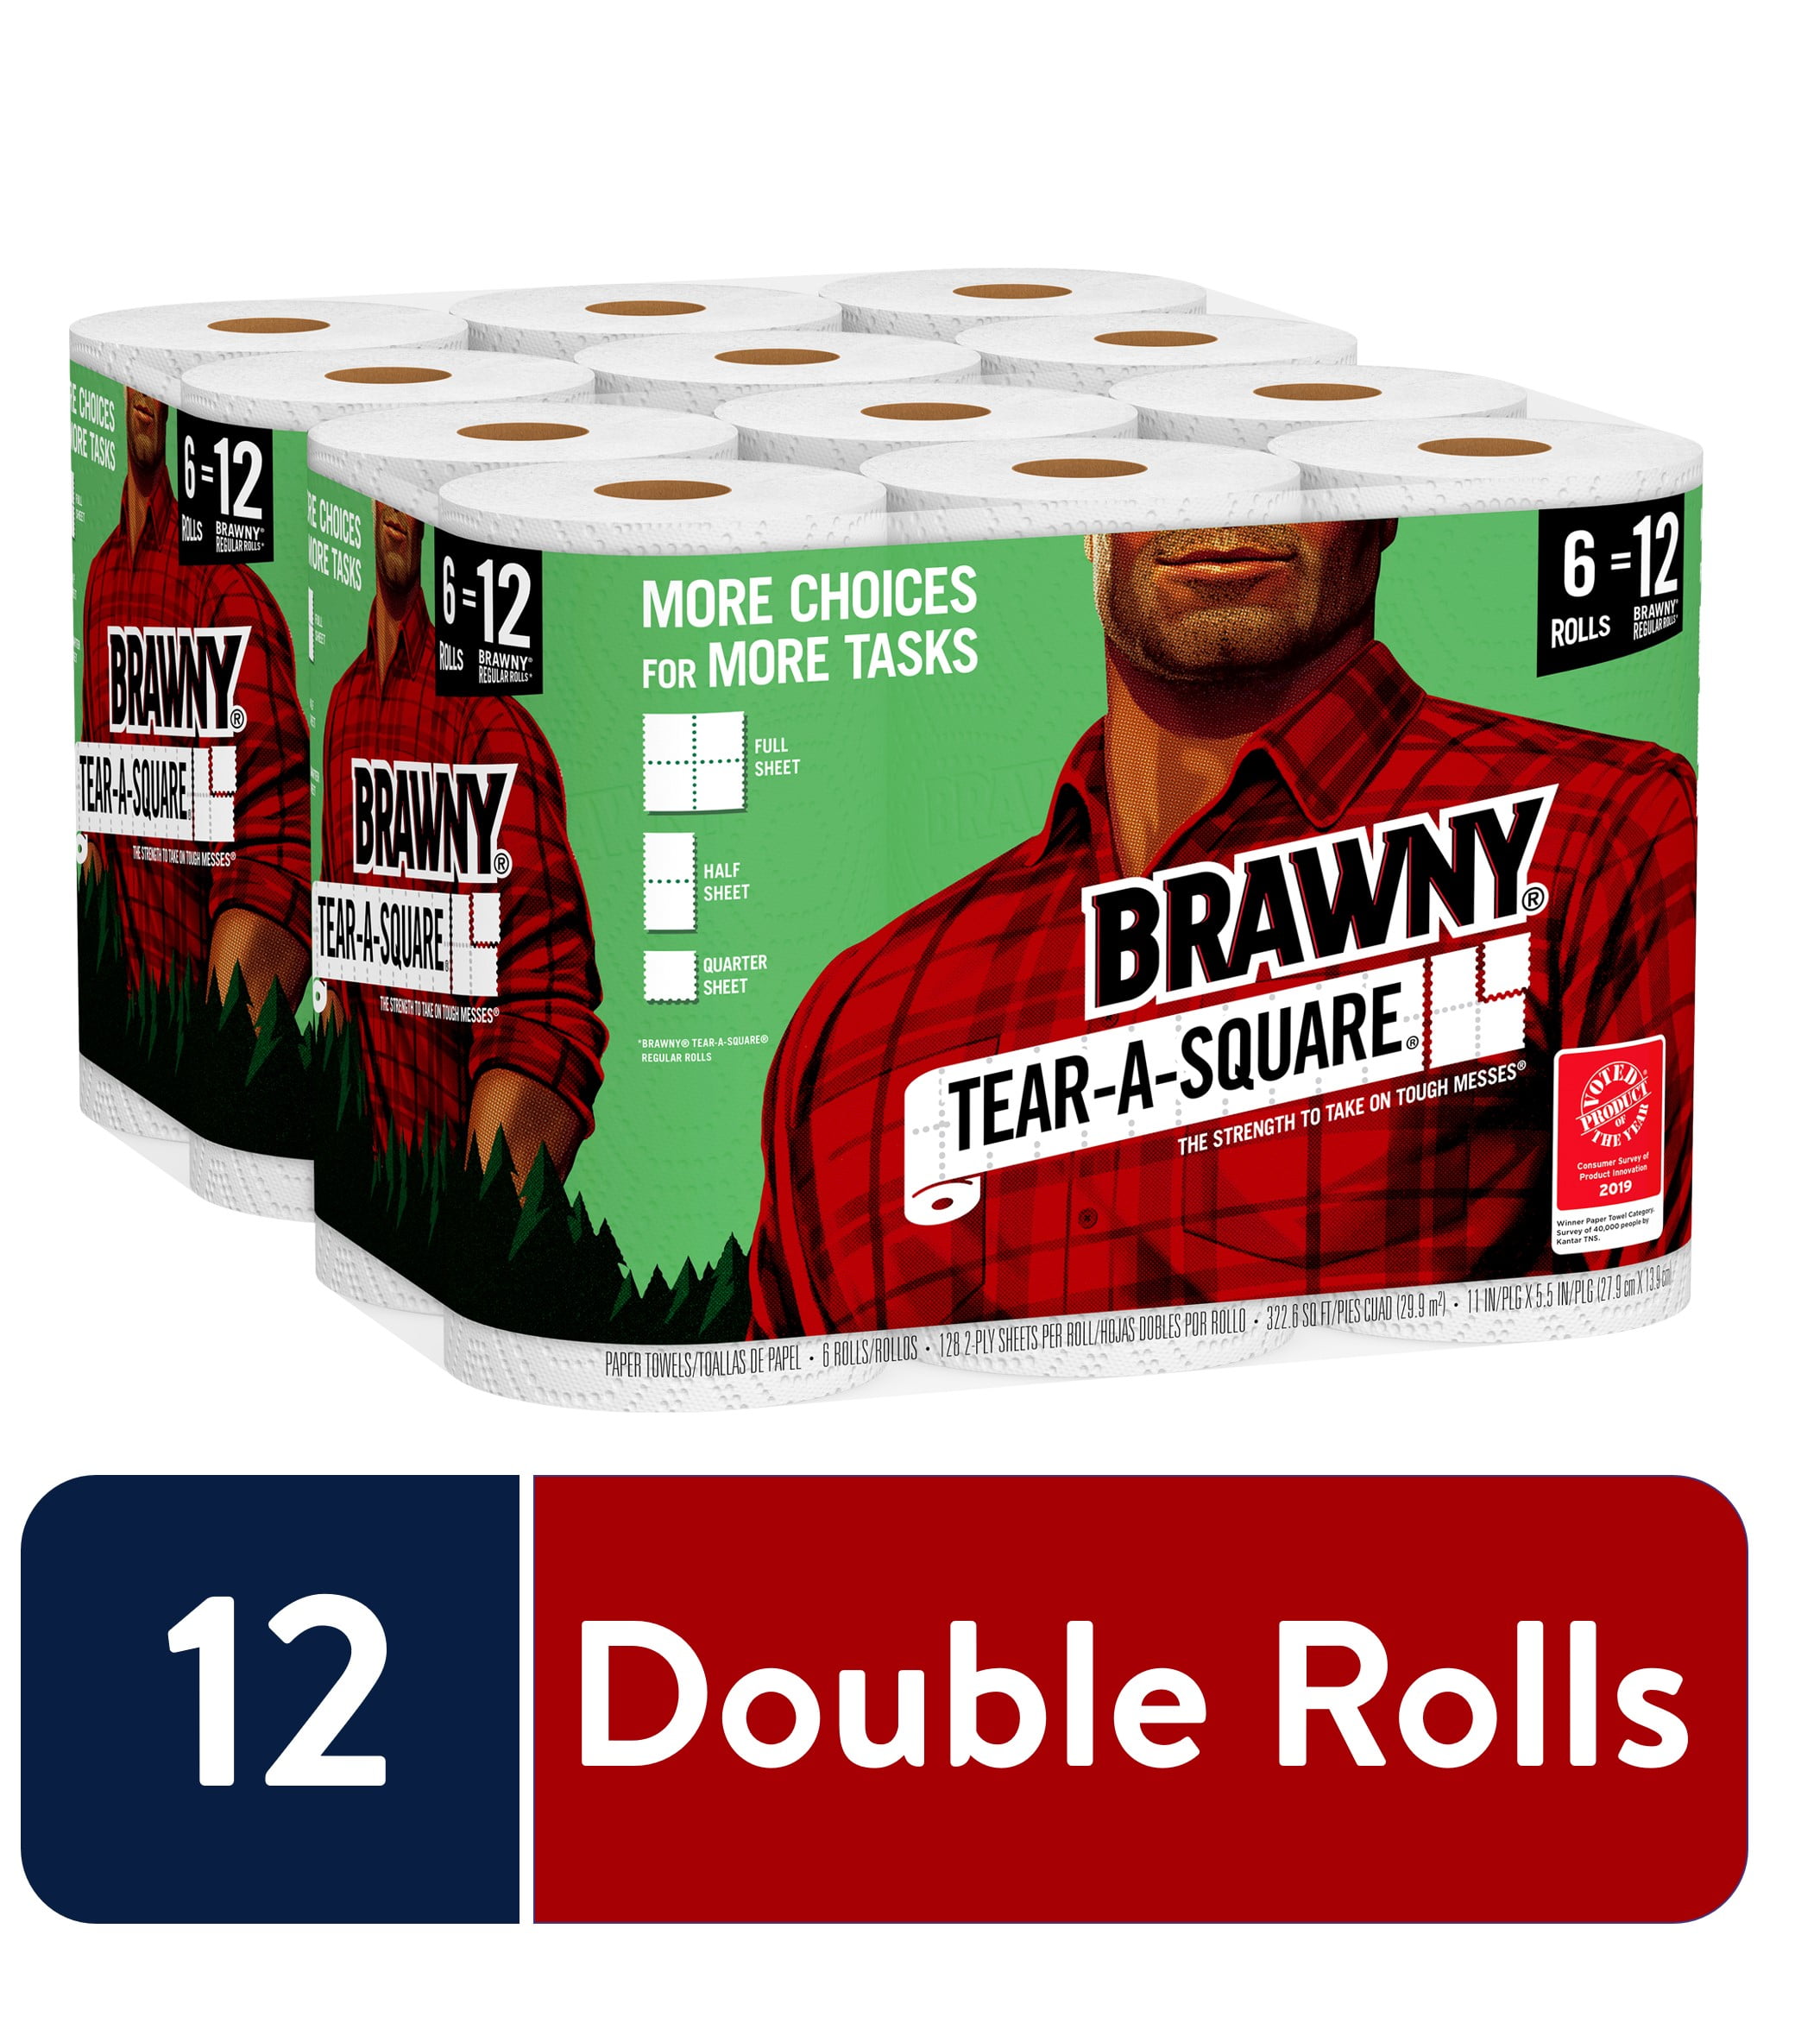 Details about   Brawny Tear-A-Square Paper Towels 6 Double Rolls FAST SHIPPING 